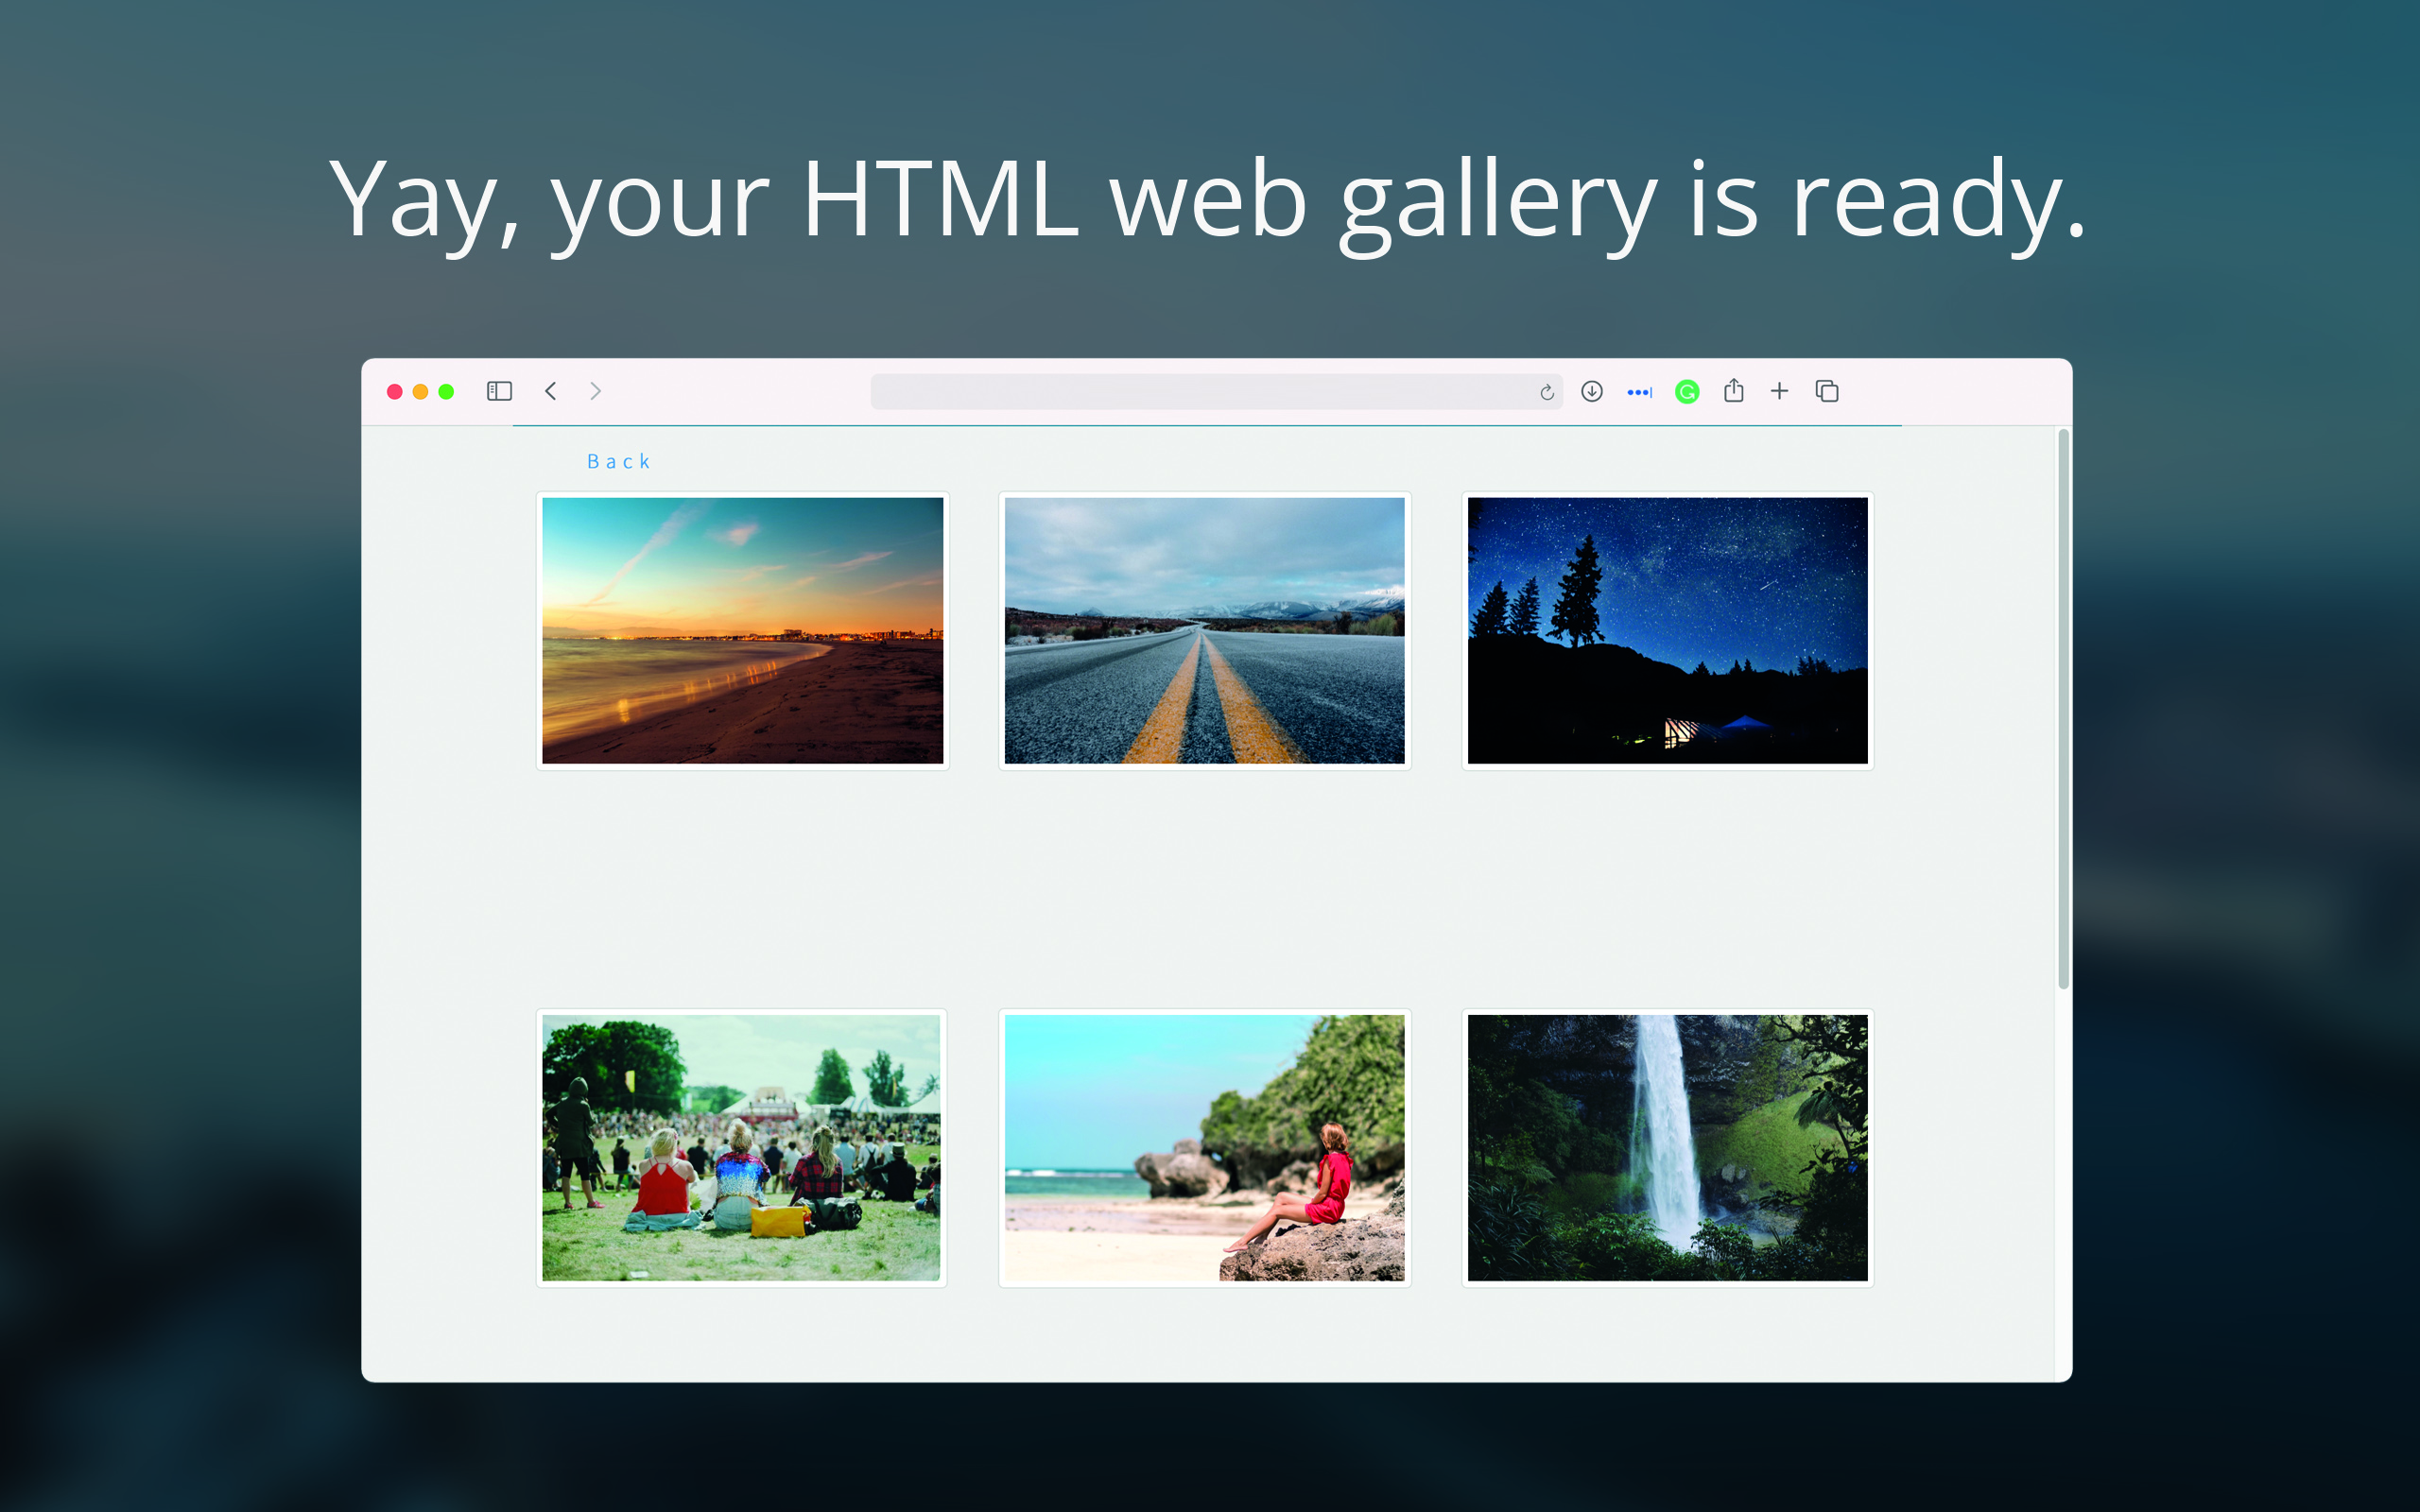 Yay, your HTML web gallery is ready.